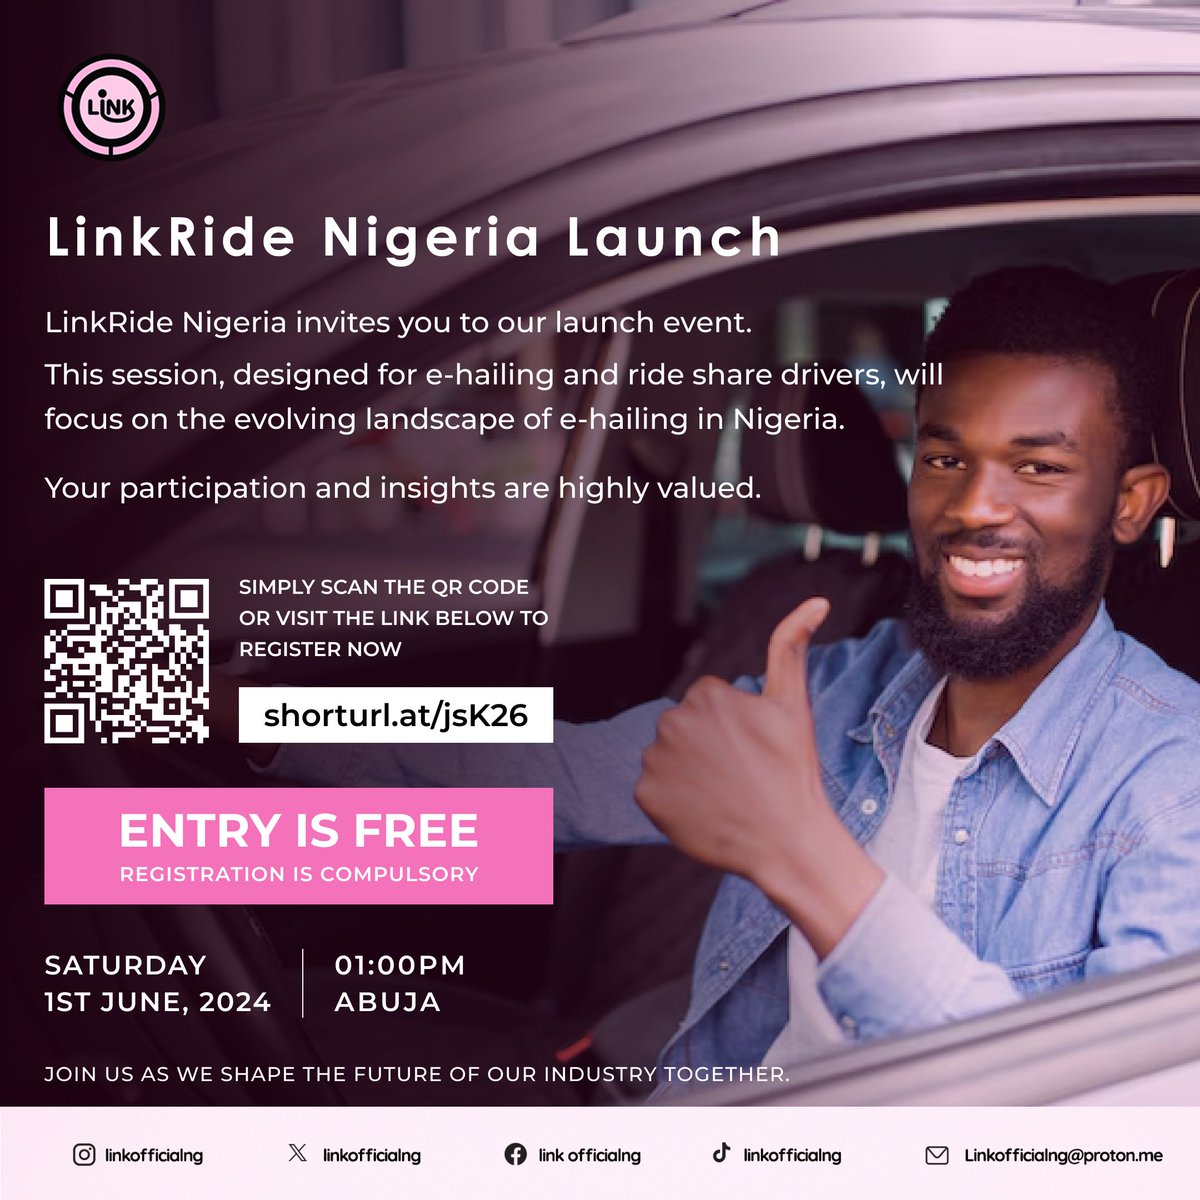 Calling all #Abuja rideshare #drivers! You're invited to the Launch of #LinkRide Nigeria on June 1st, 2024, at 1:00 PM in Abuja. Entry is free, but registration is compulsory. Secure your spot now: bit.ly/LinkRideLaunch For inquiries, contact Linkofficial@protonmail.com #TGIF